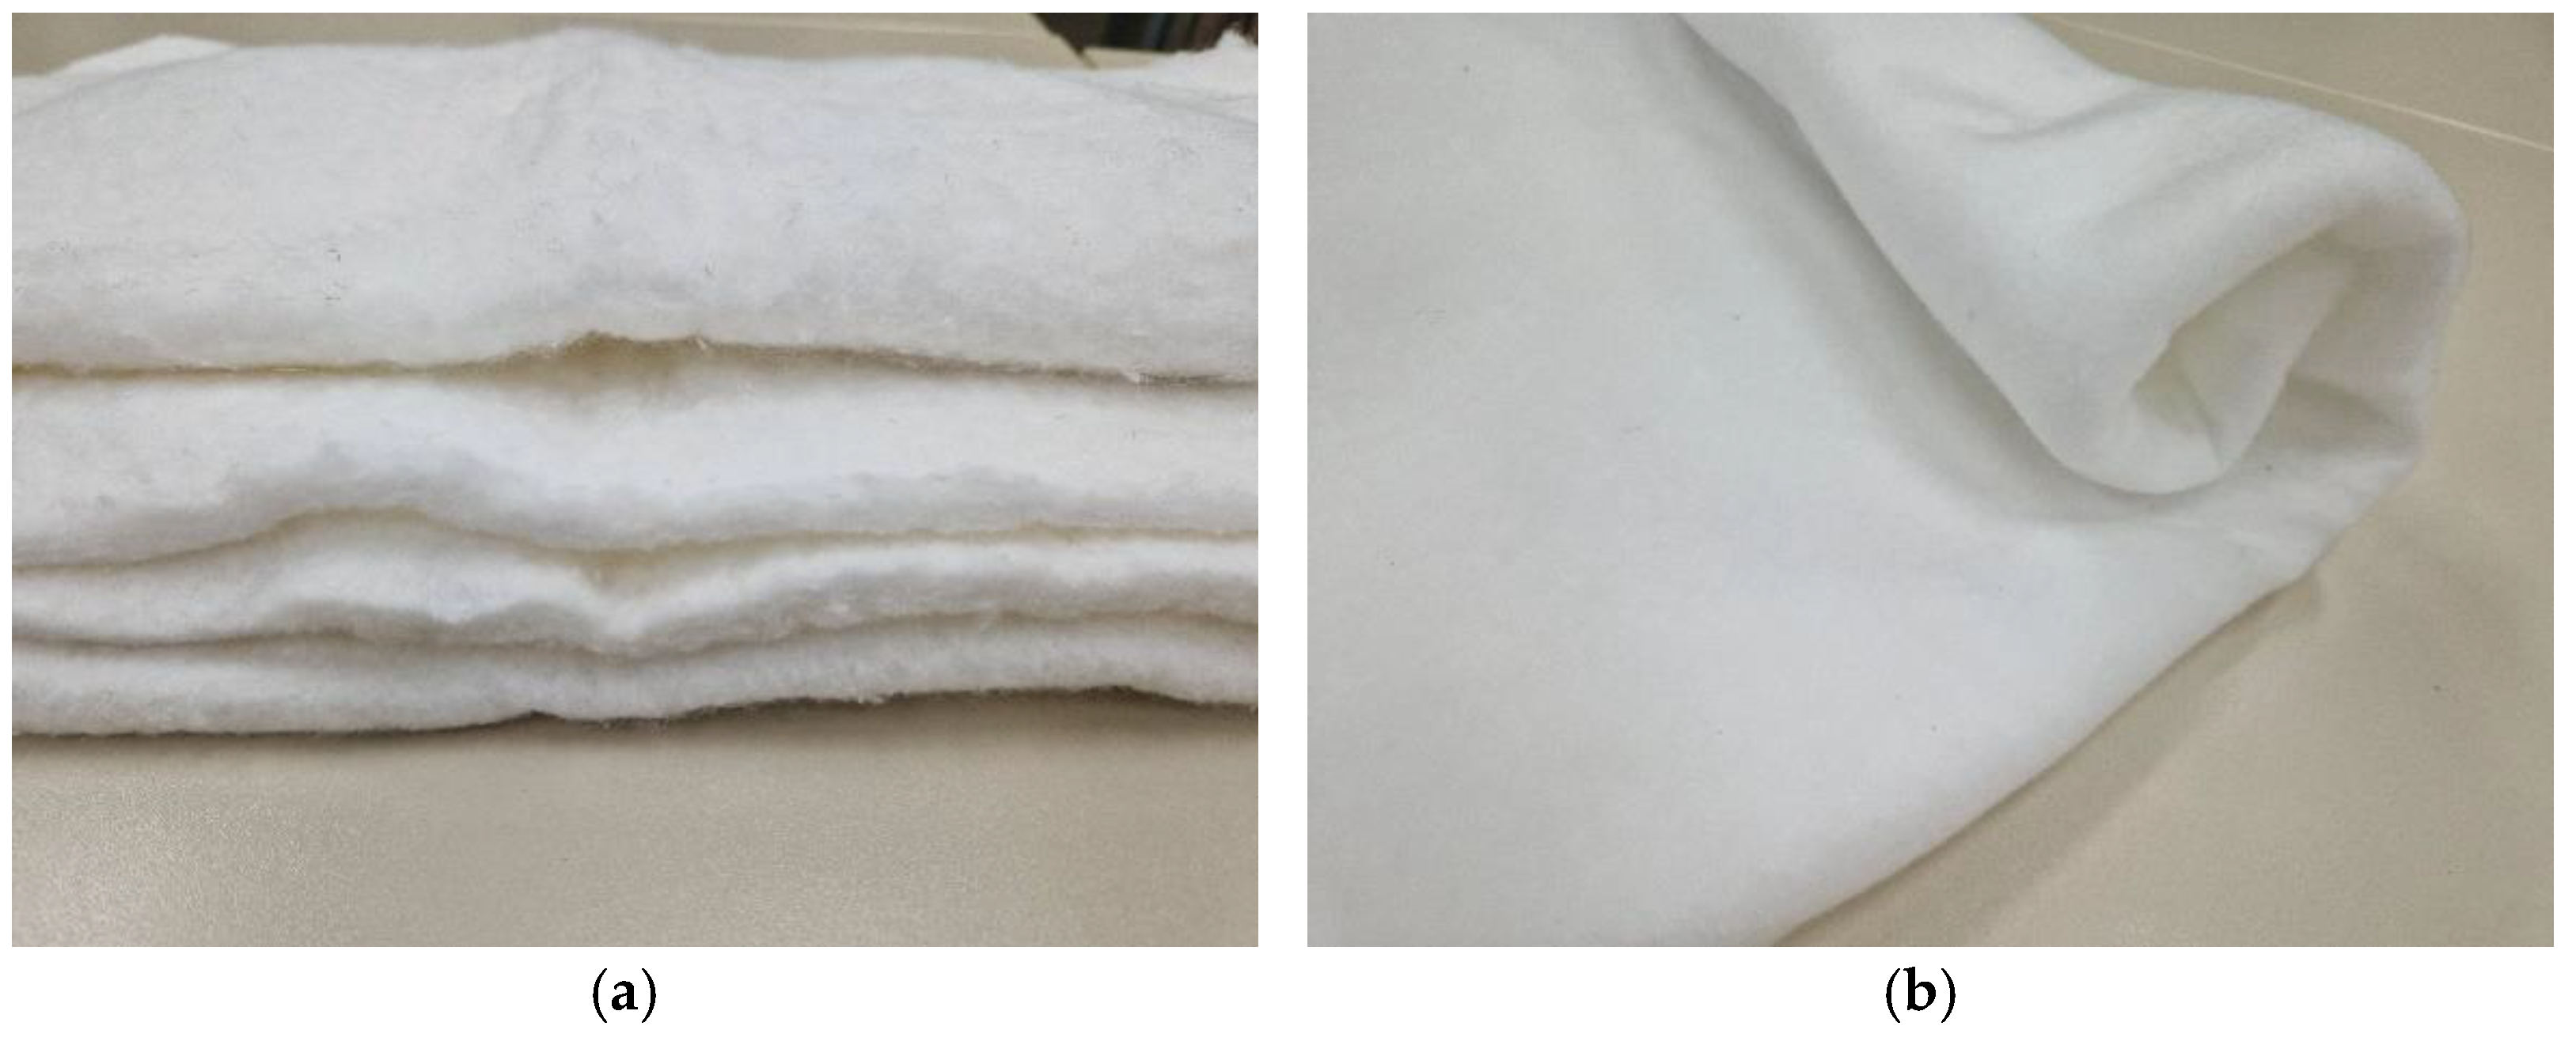 The Case for Blending Purified Cotton in Nonwovens